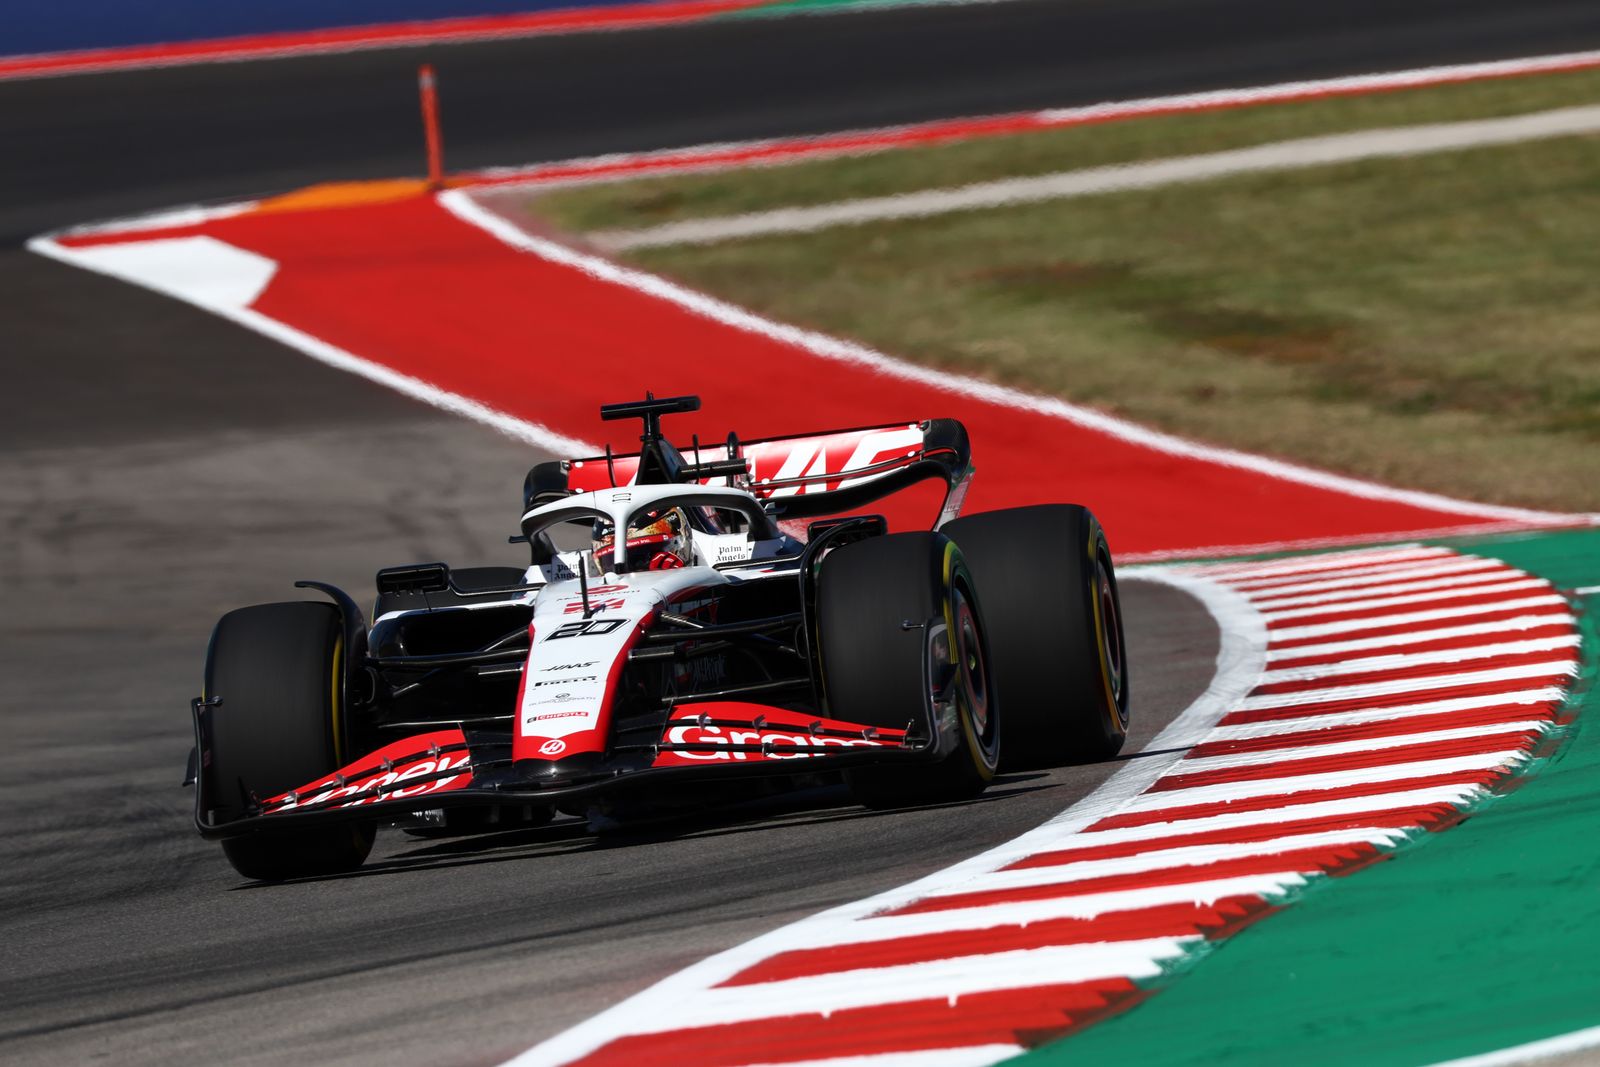 Letdown or misleading? Haas's biggest day of F1 2023 - The Race